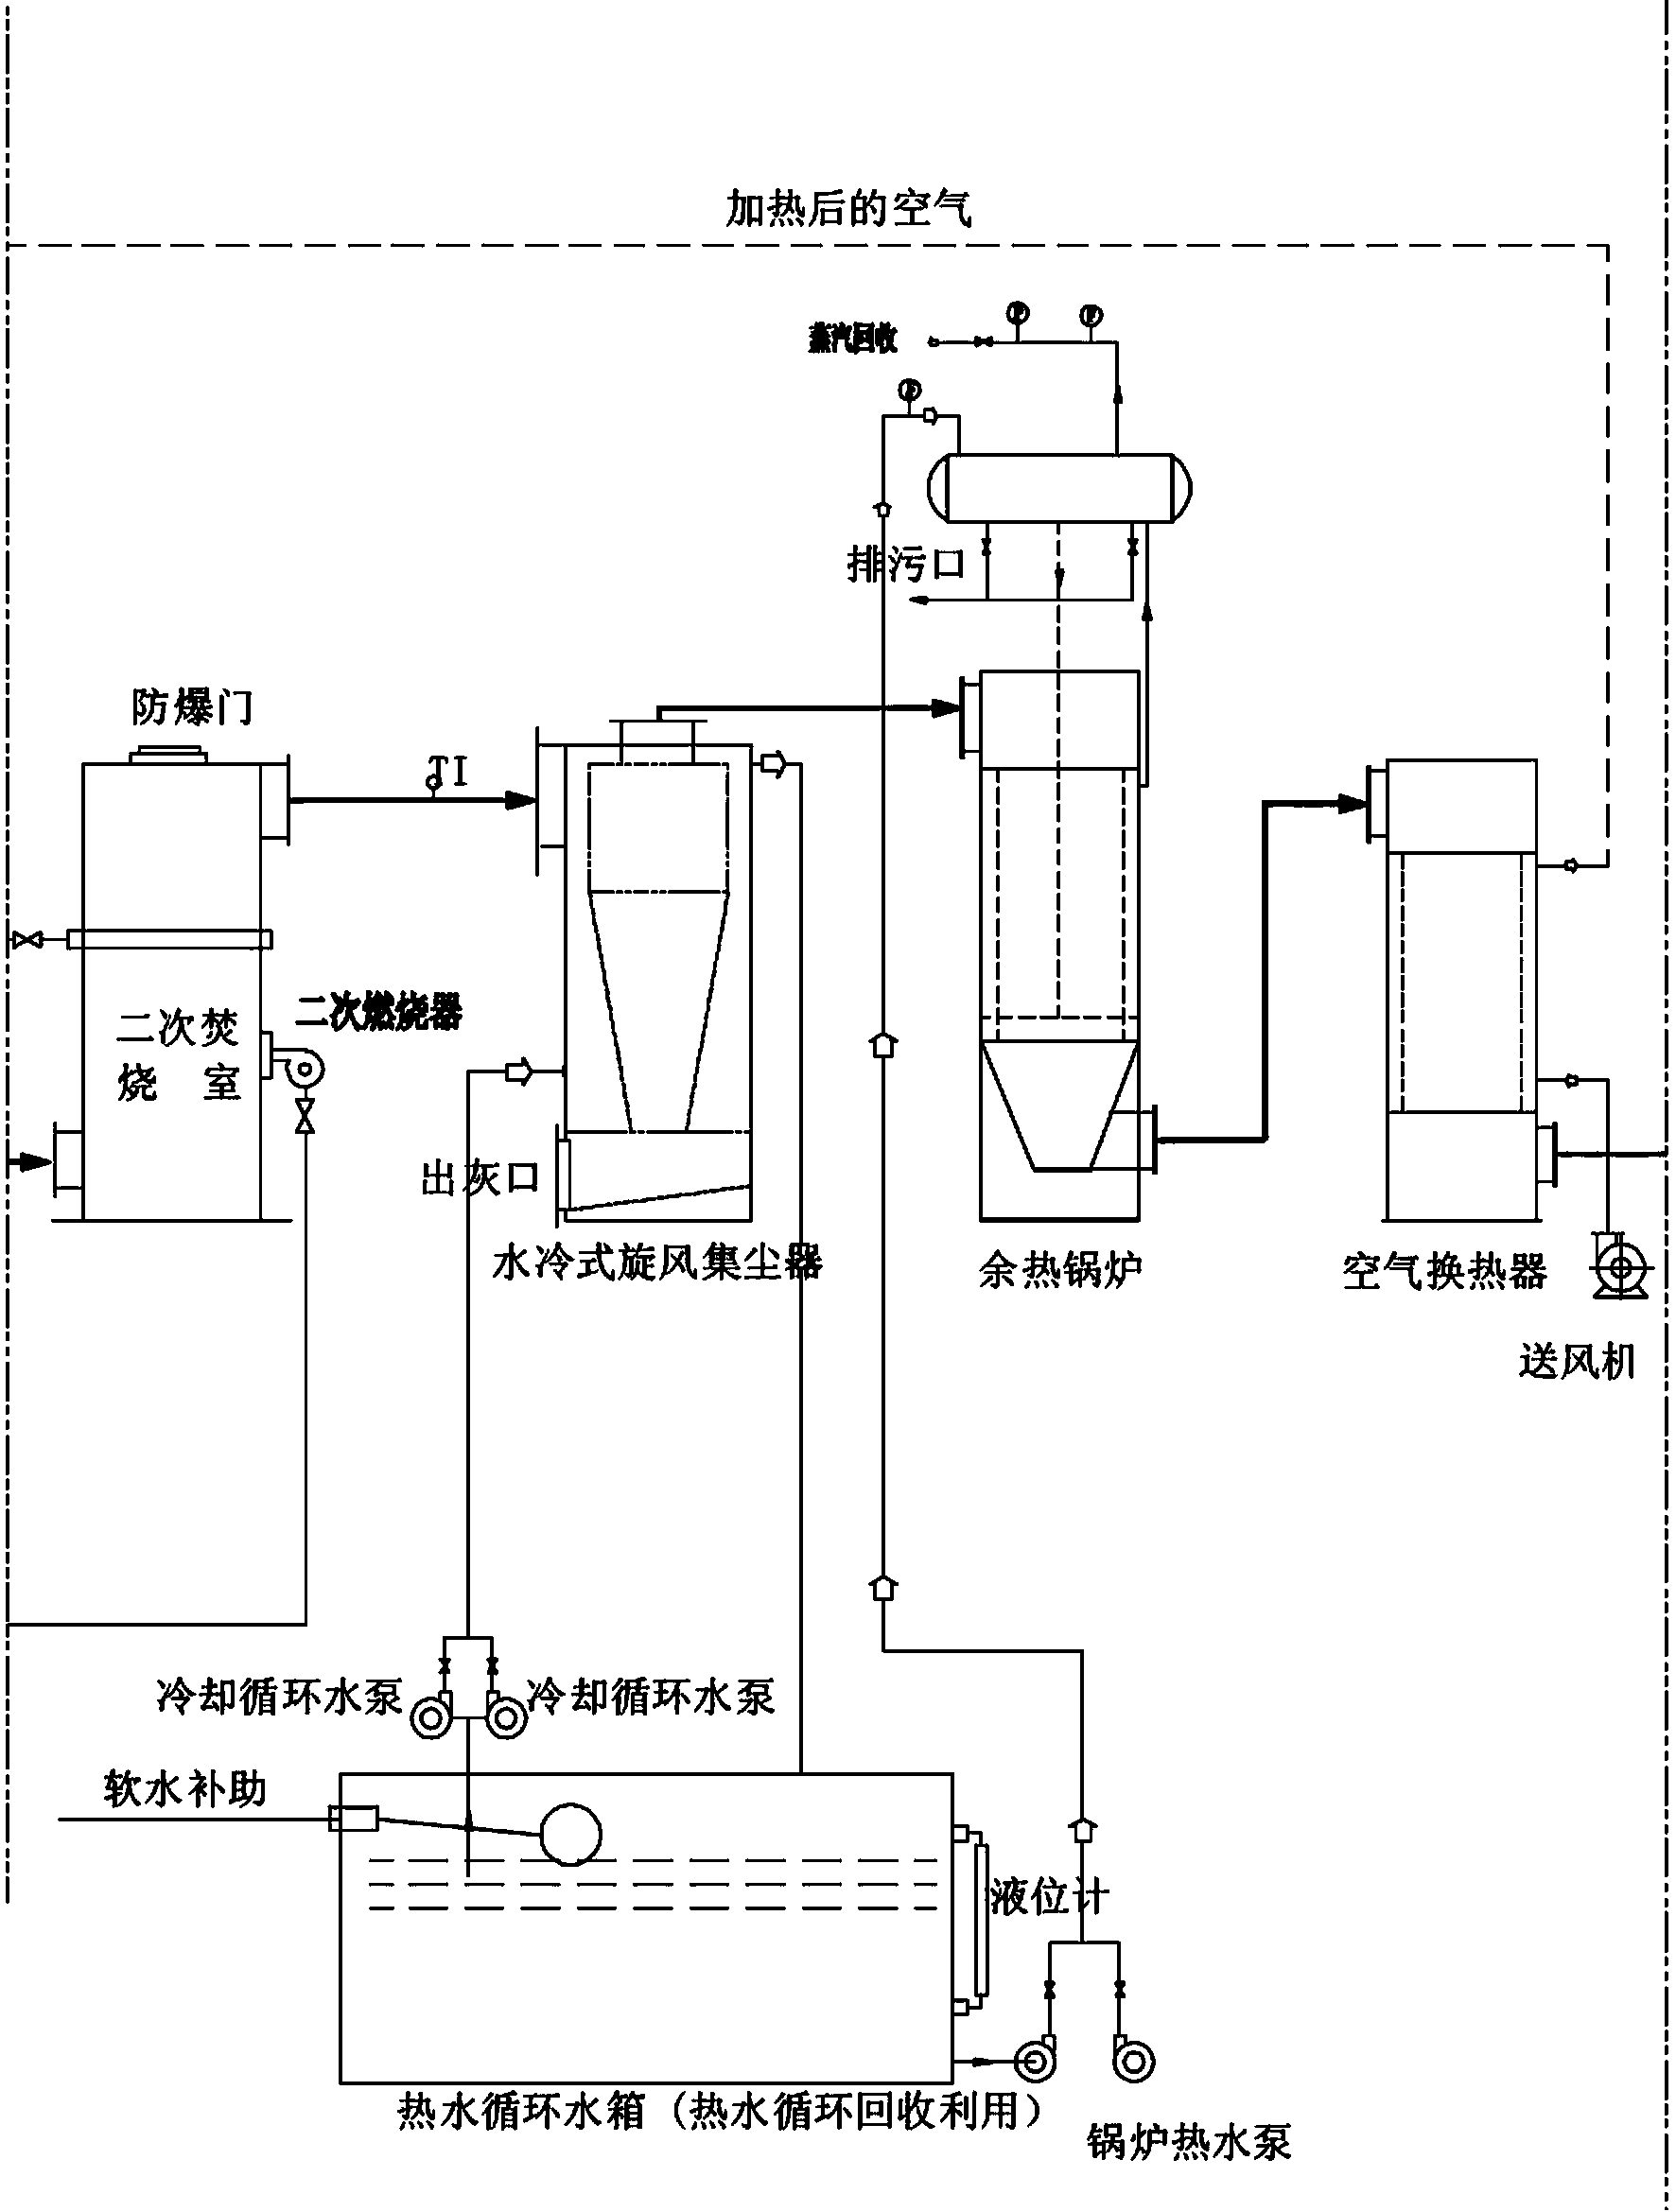 Salt-containing waste liquid combustion and heat energy recycling system and process